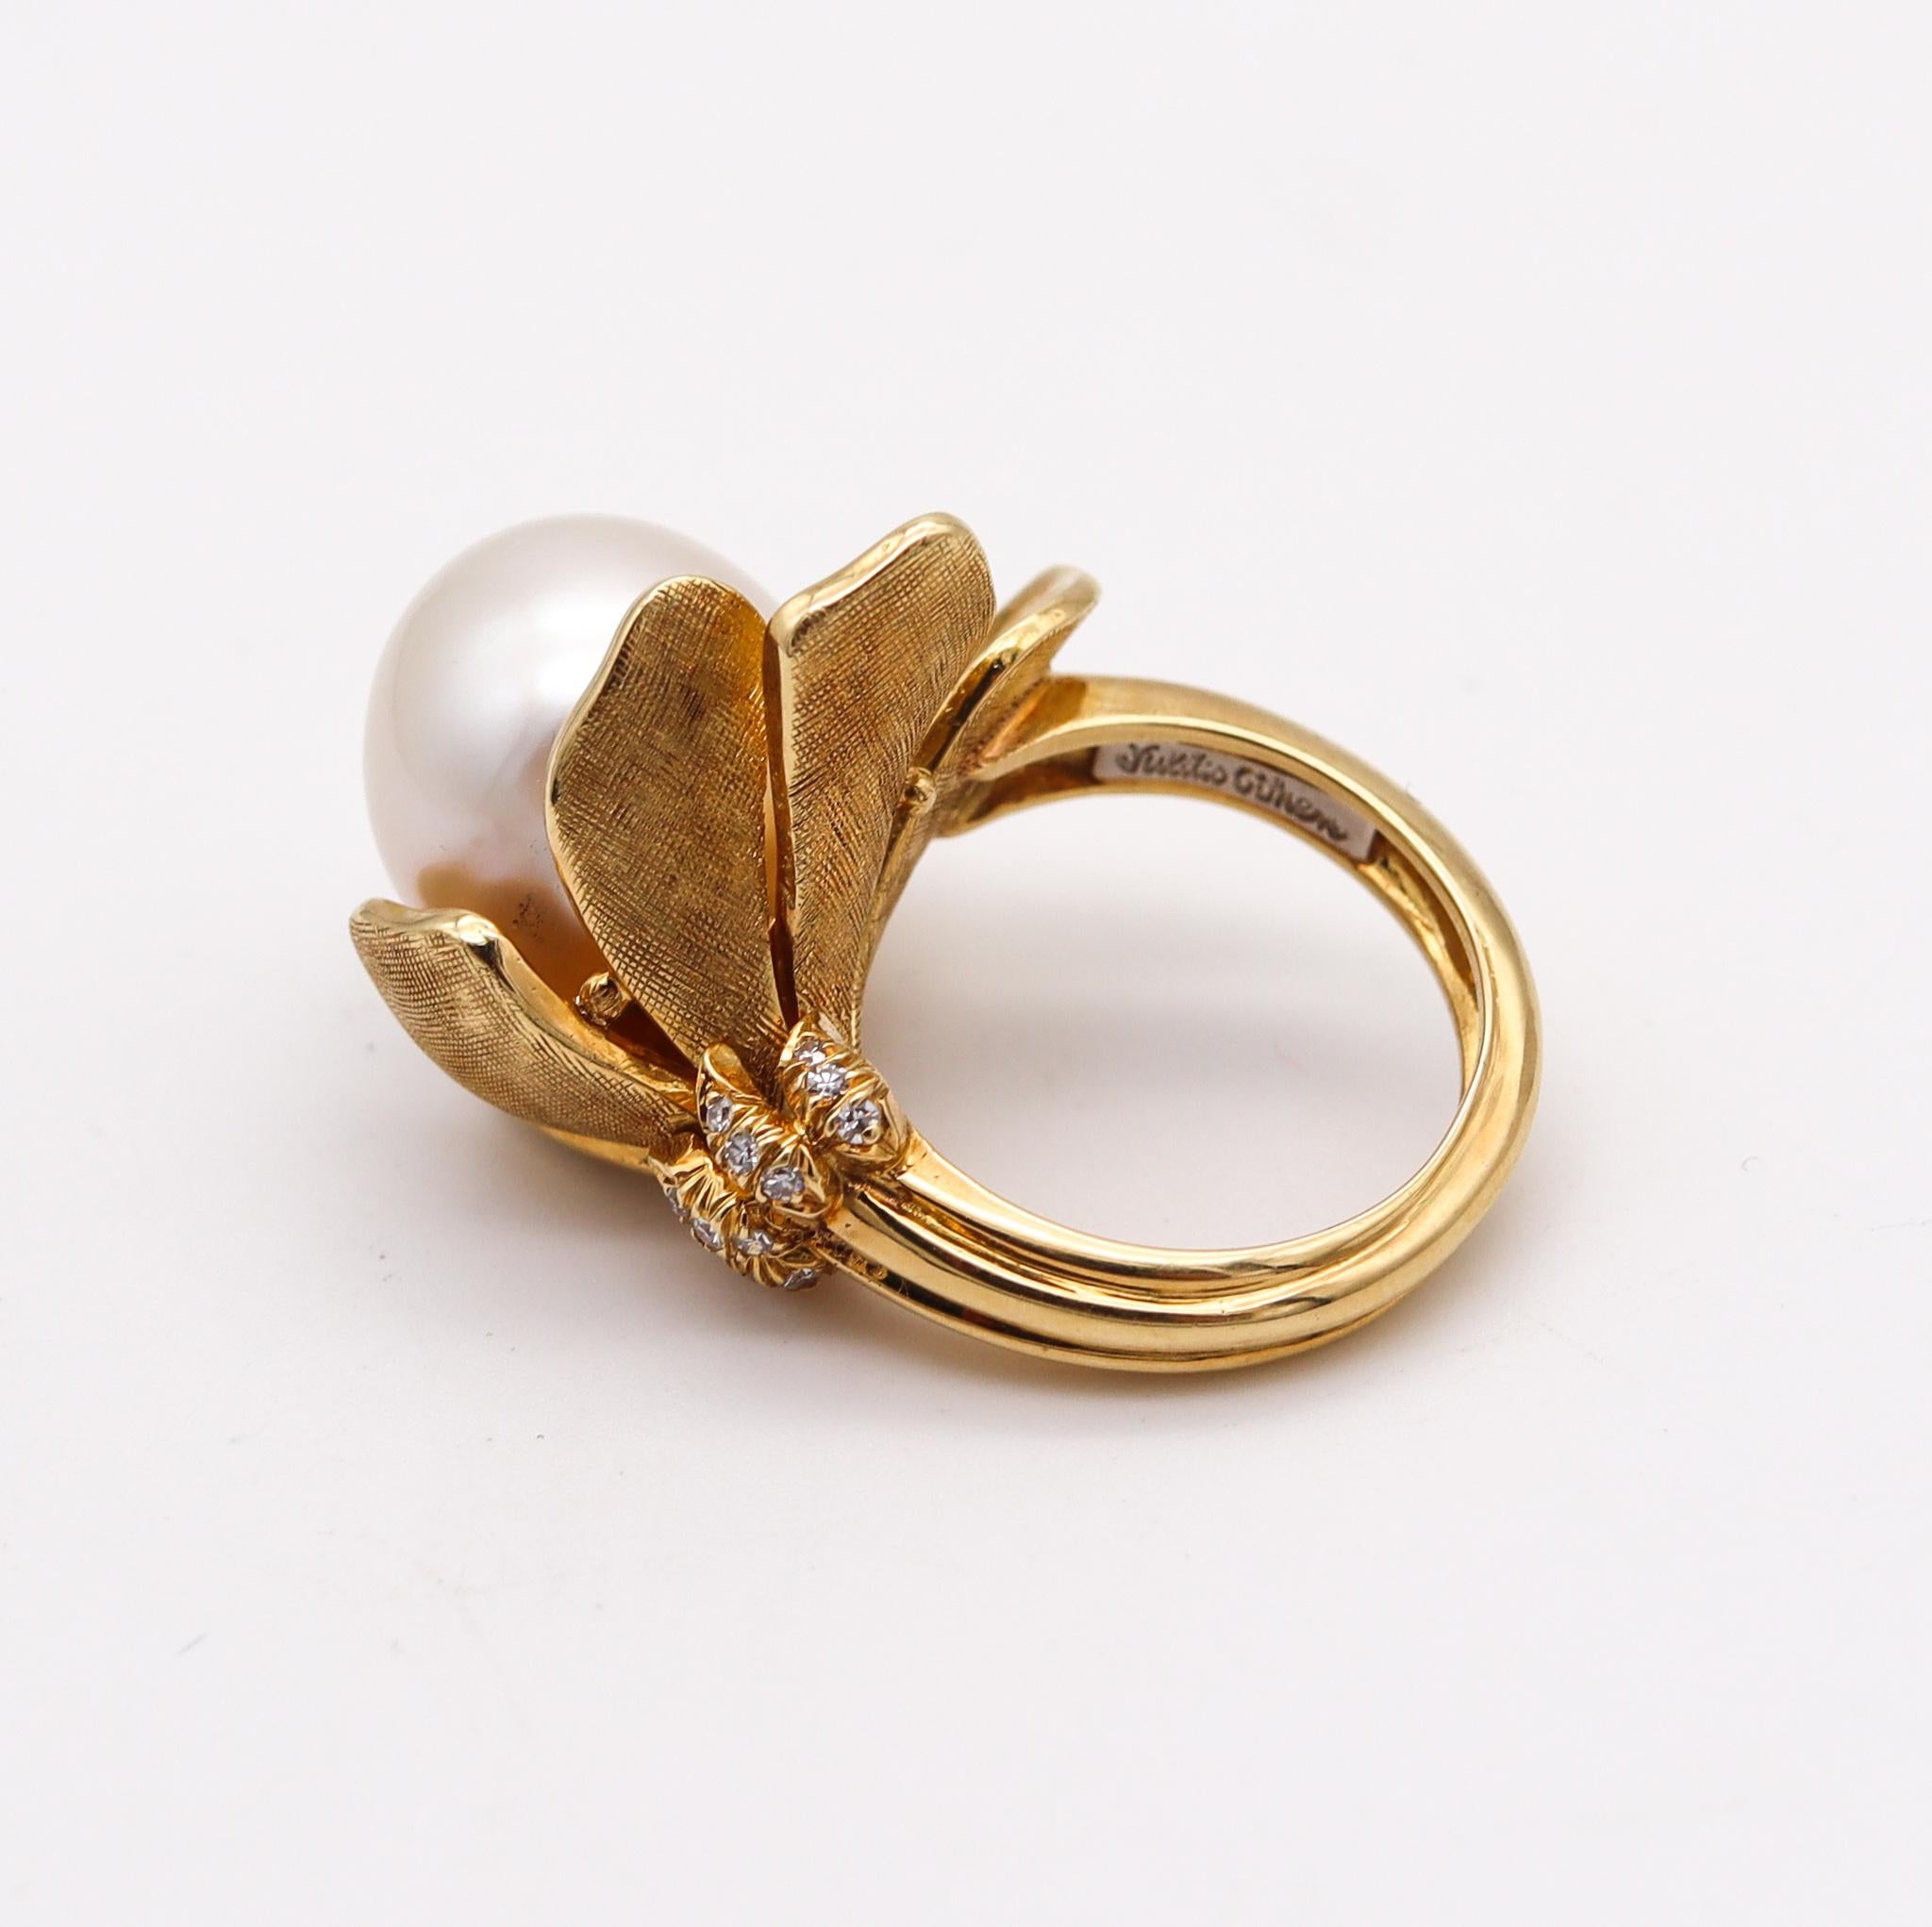 Brilliant Cut Julius Cohen Cocktail Ringin 18Kt Gold with Diamonds and South Sea Pearl